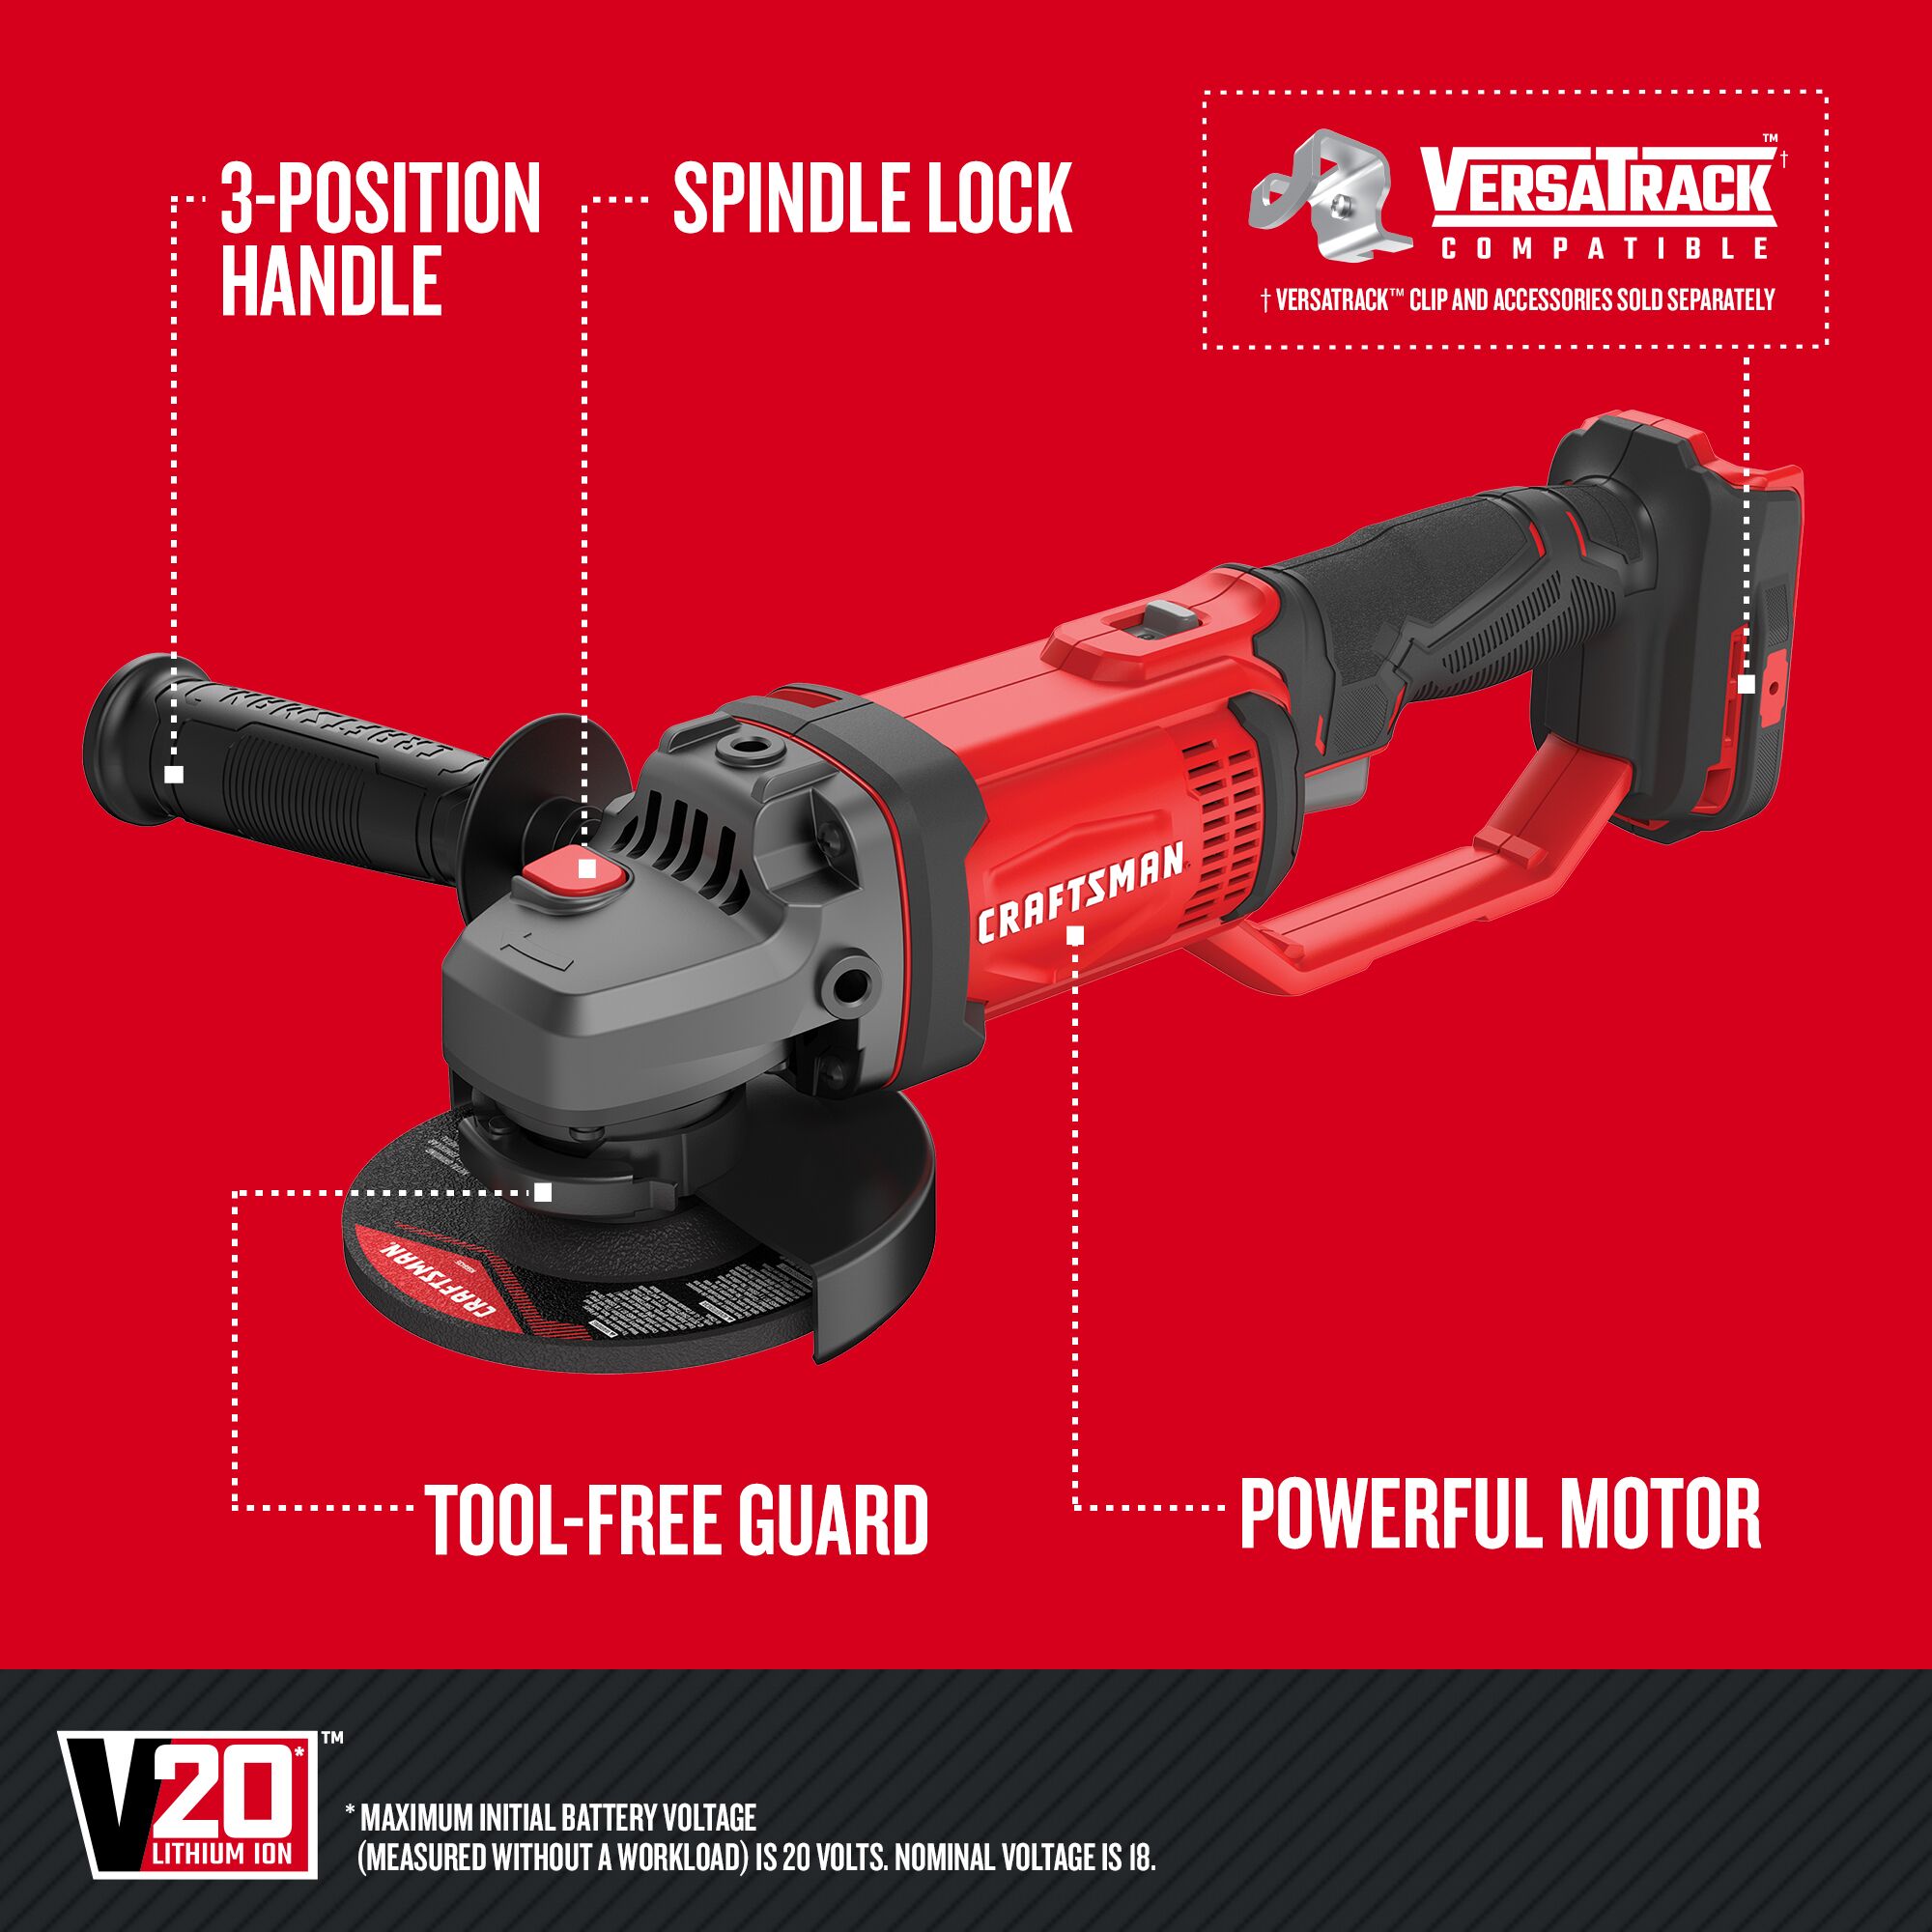 Graphic of CRAFTSMAN Angle Grinder highlighting product features